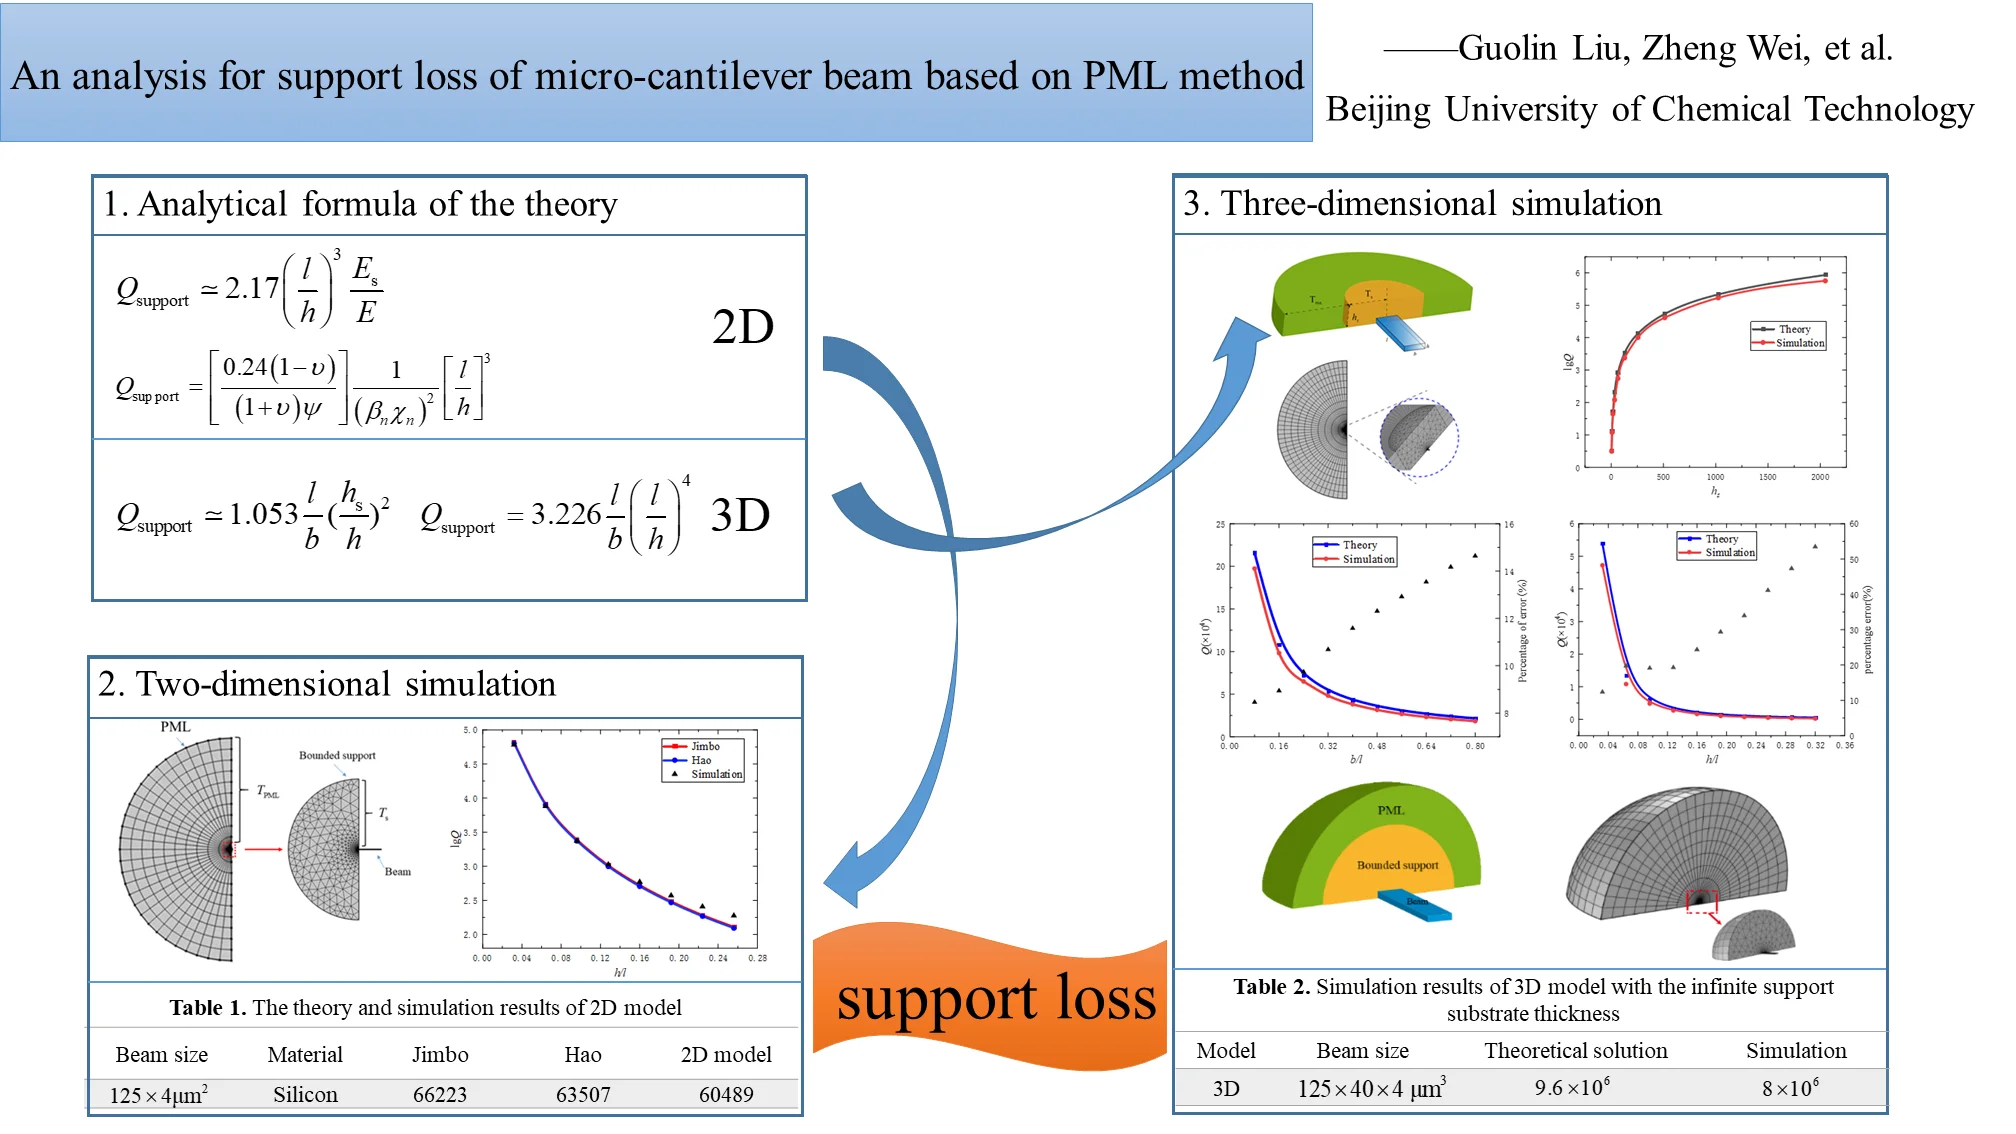 An analysis for support loss of micro-cantilever beam based on PML method